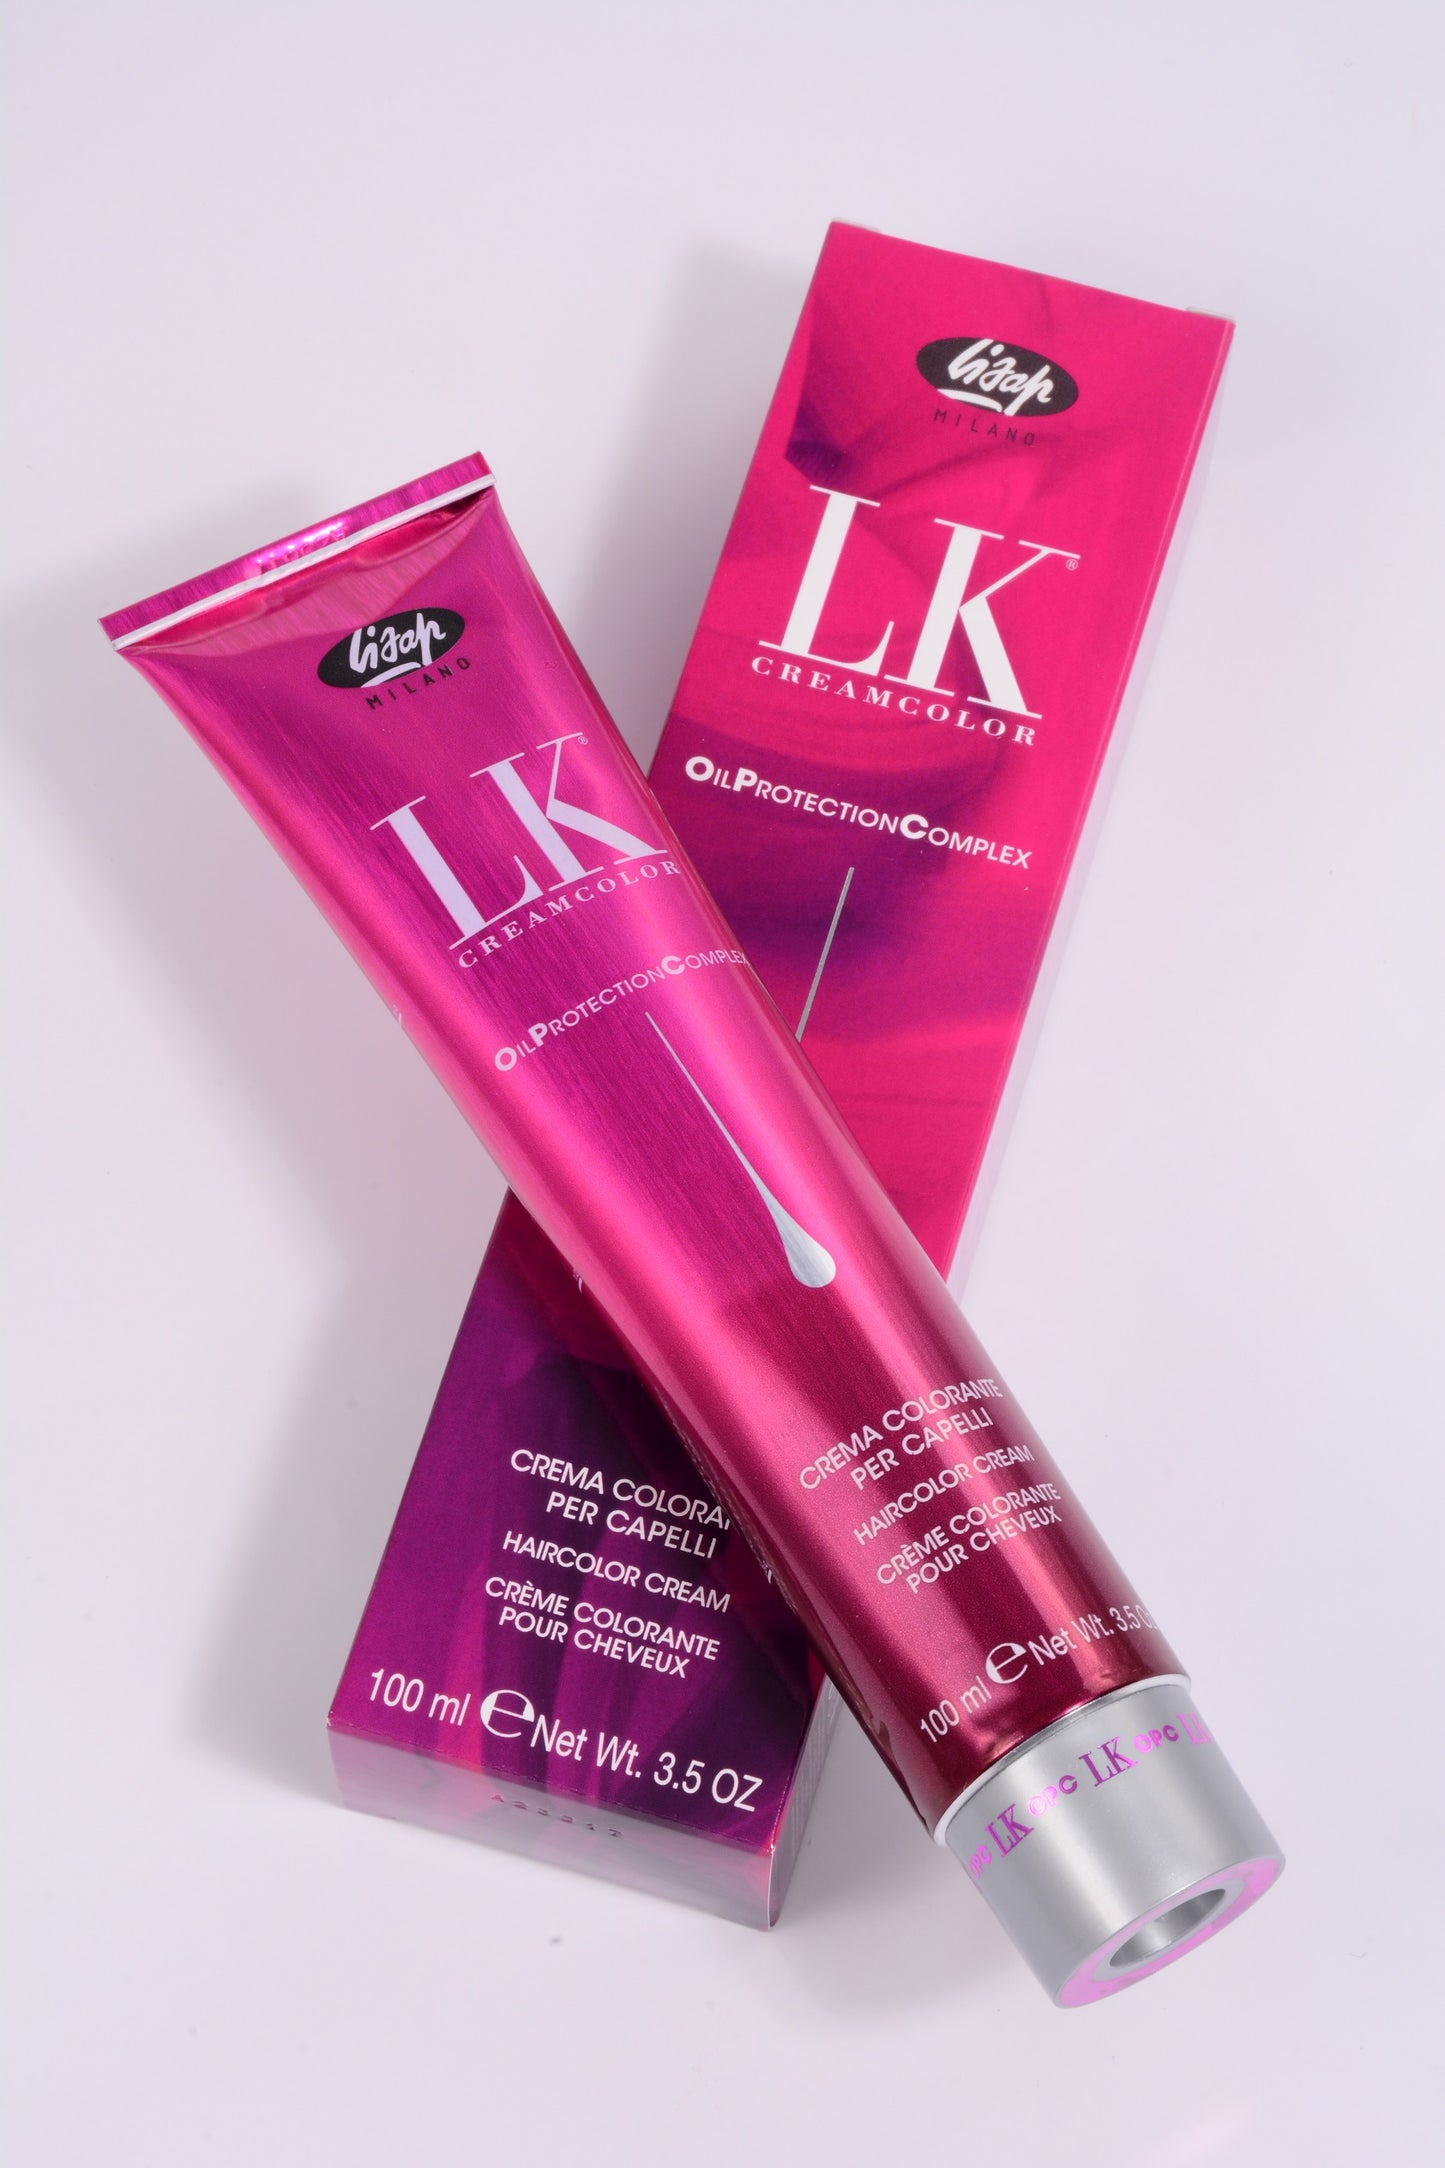 LK Creamcolor 4/68 Oil Protection Complex